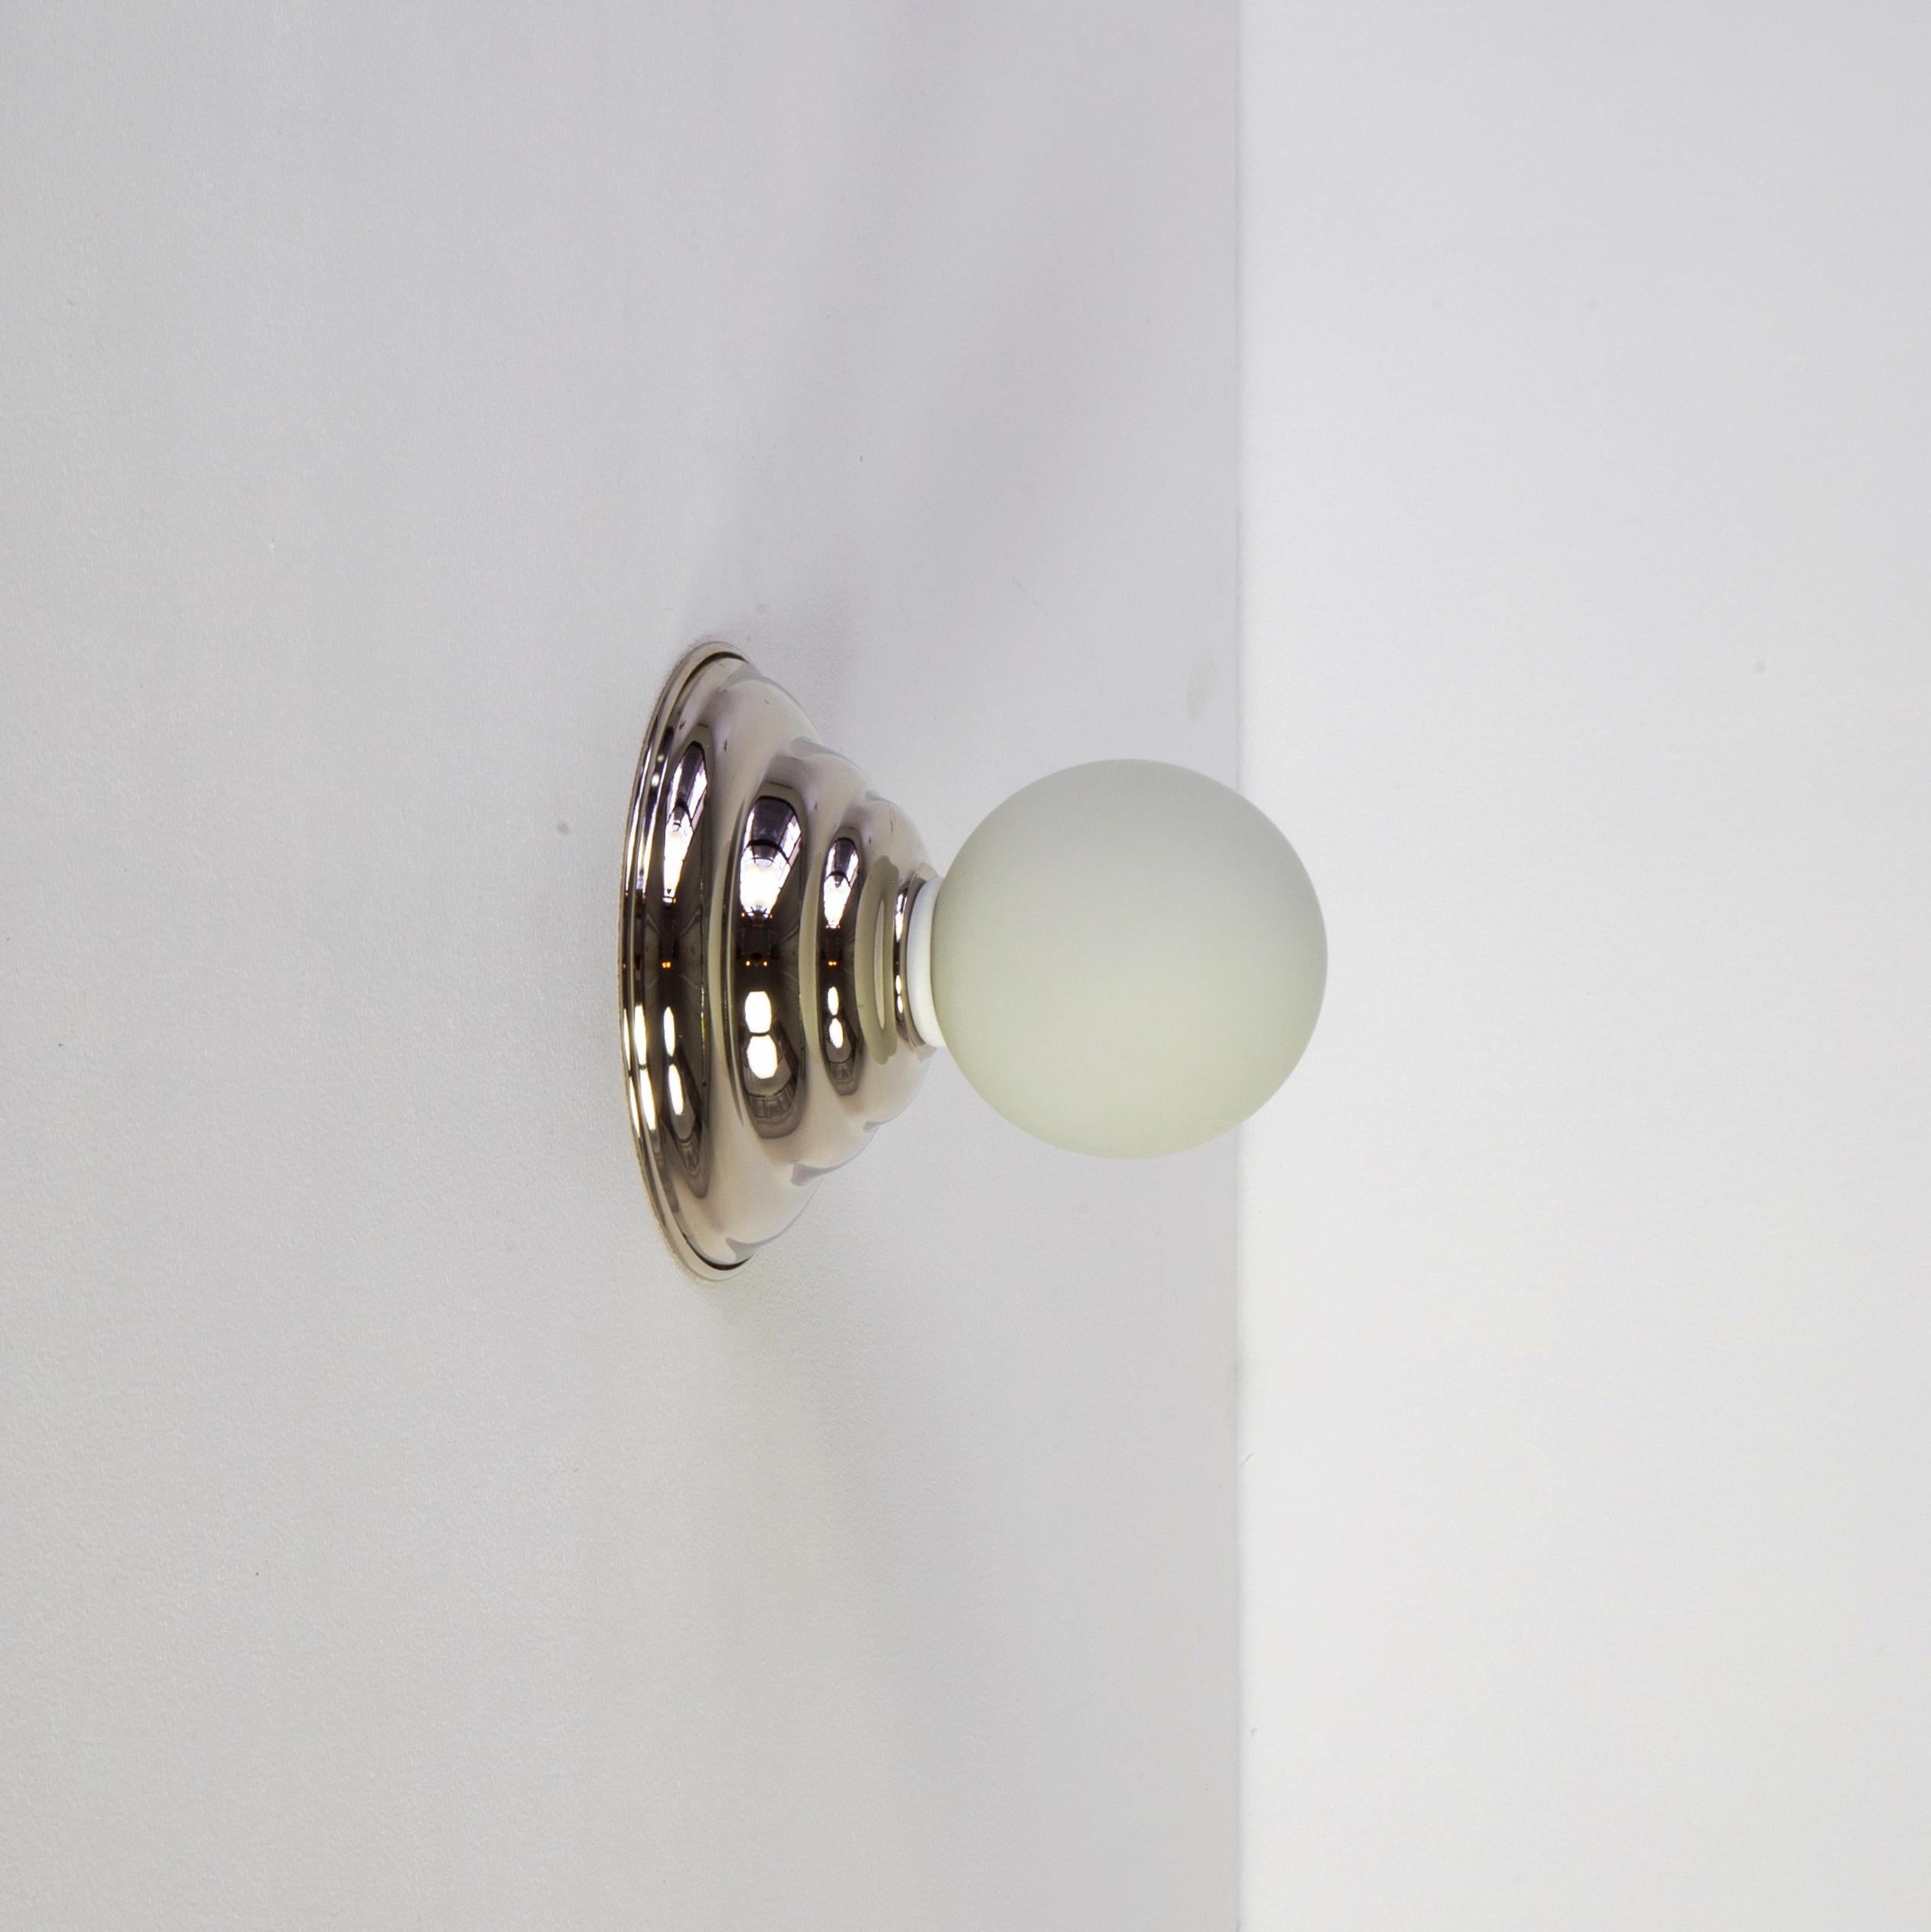 American Hive Sconce by Research.Lighting, Polished Nickel, In Stock For Sale